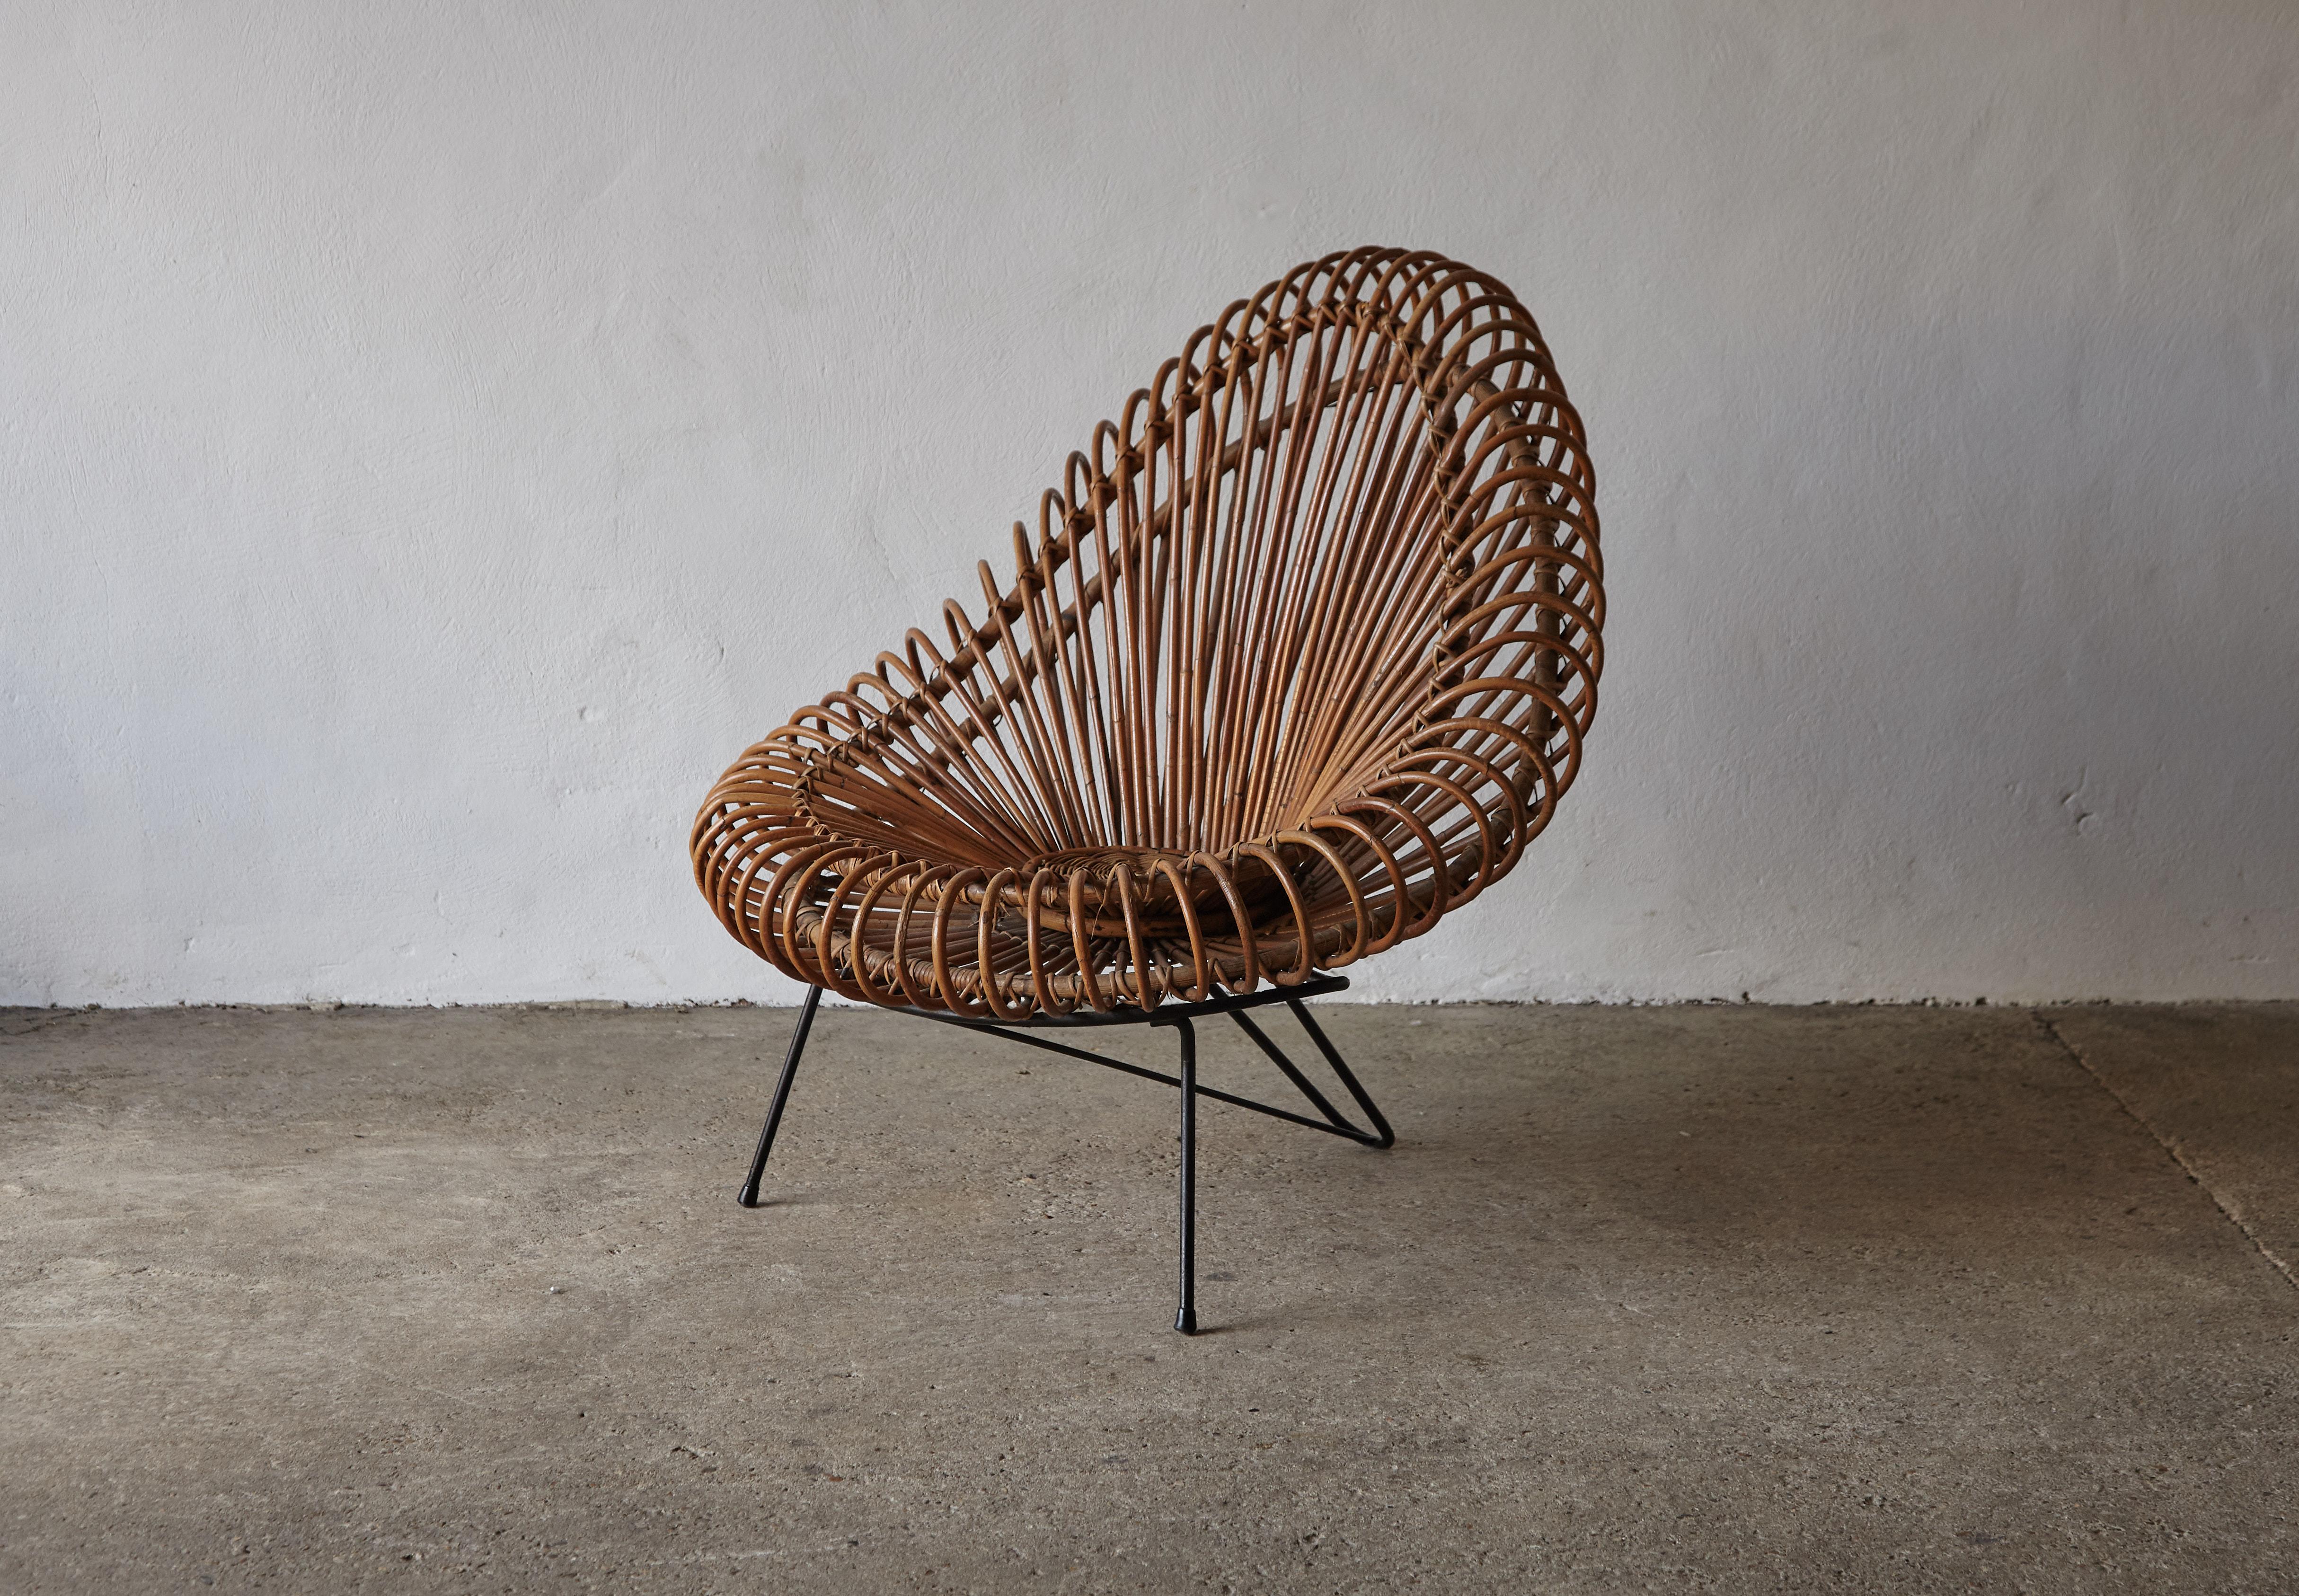 Janine Abraham & Dirk Jan Rol Chair for Rougier, France, 1950s. Some minor cane losses but overall in good original condition. 

The price is for a single chair - only one chair is available.

Fast shipping worldwide.
